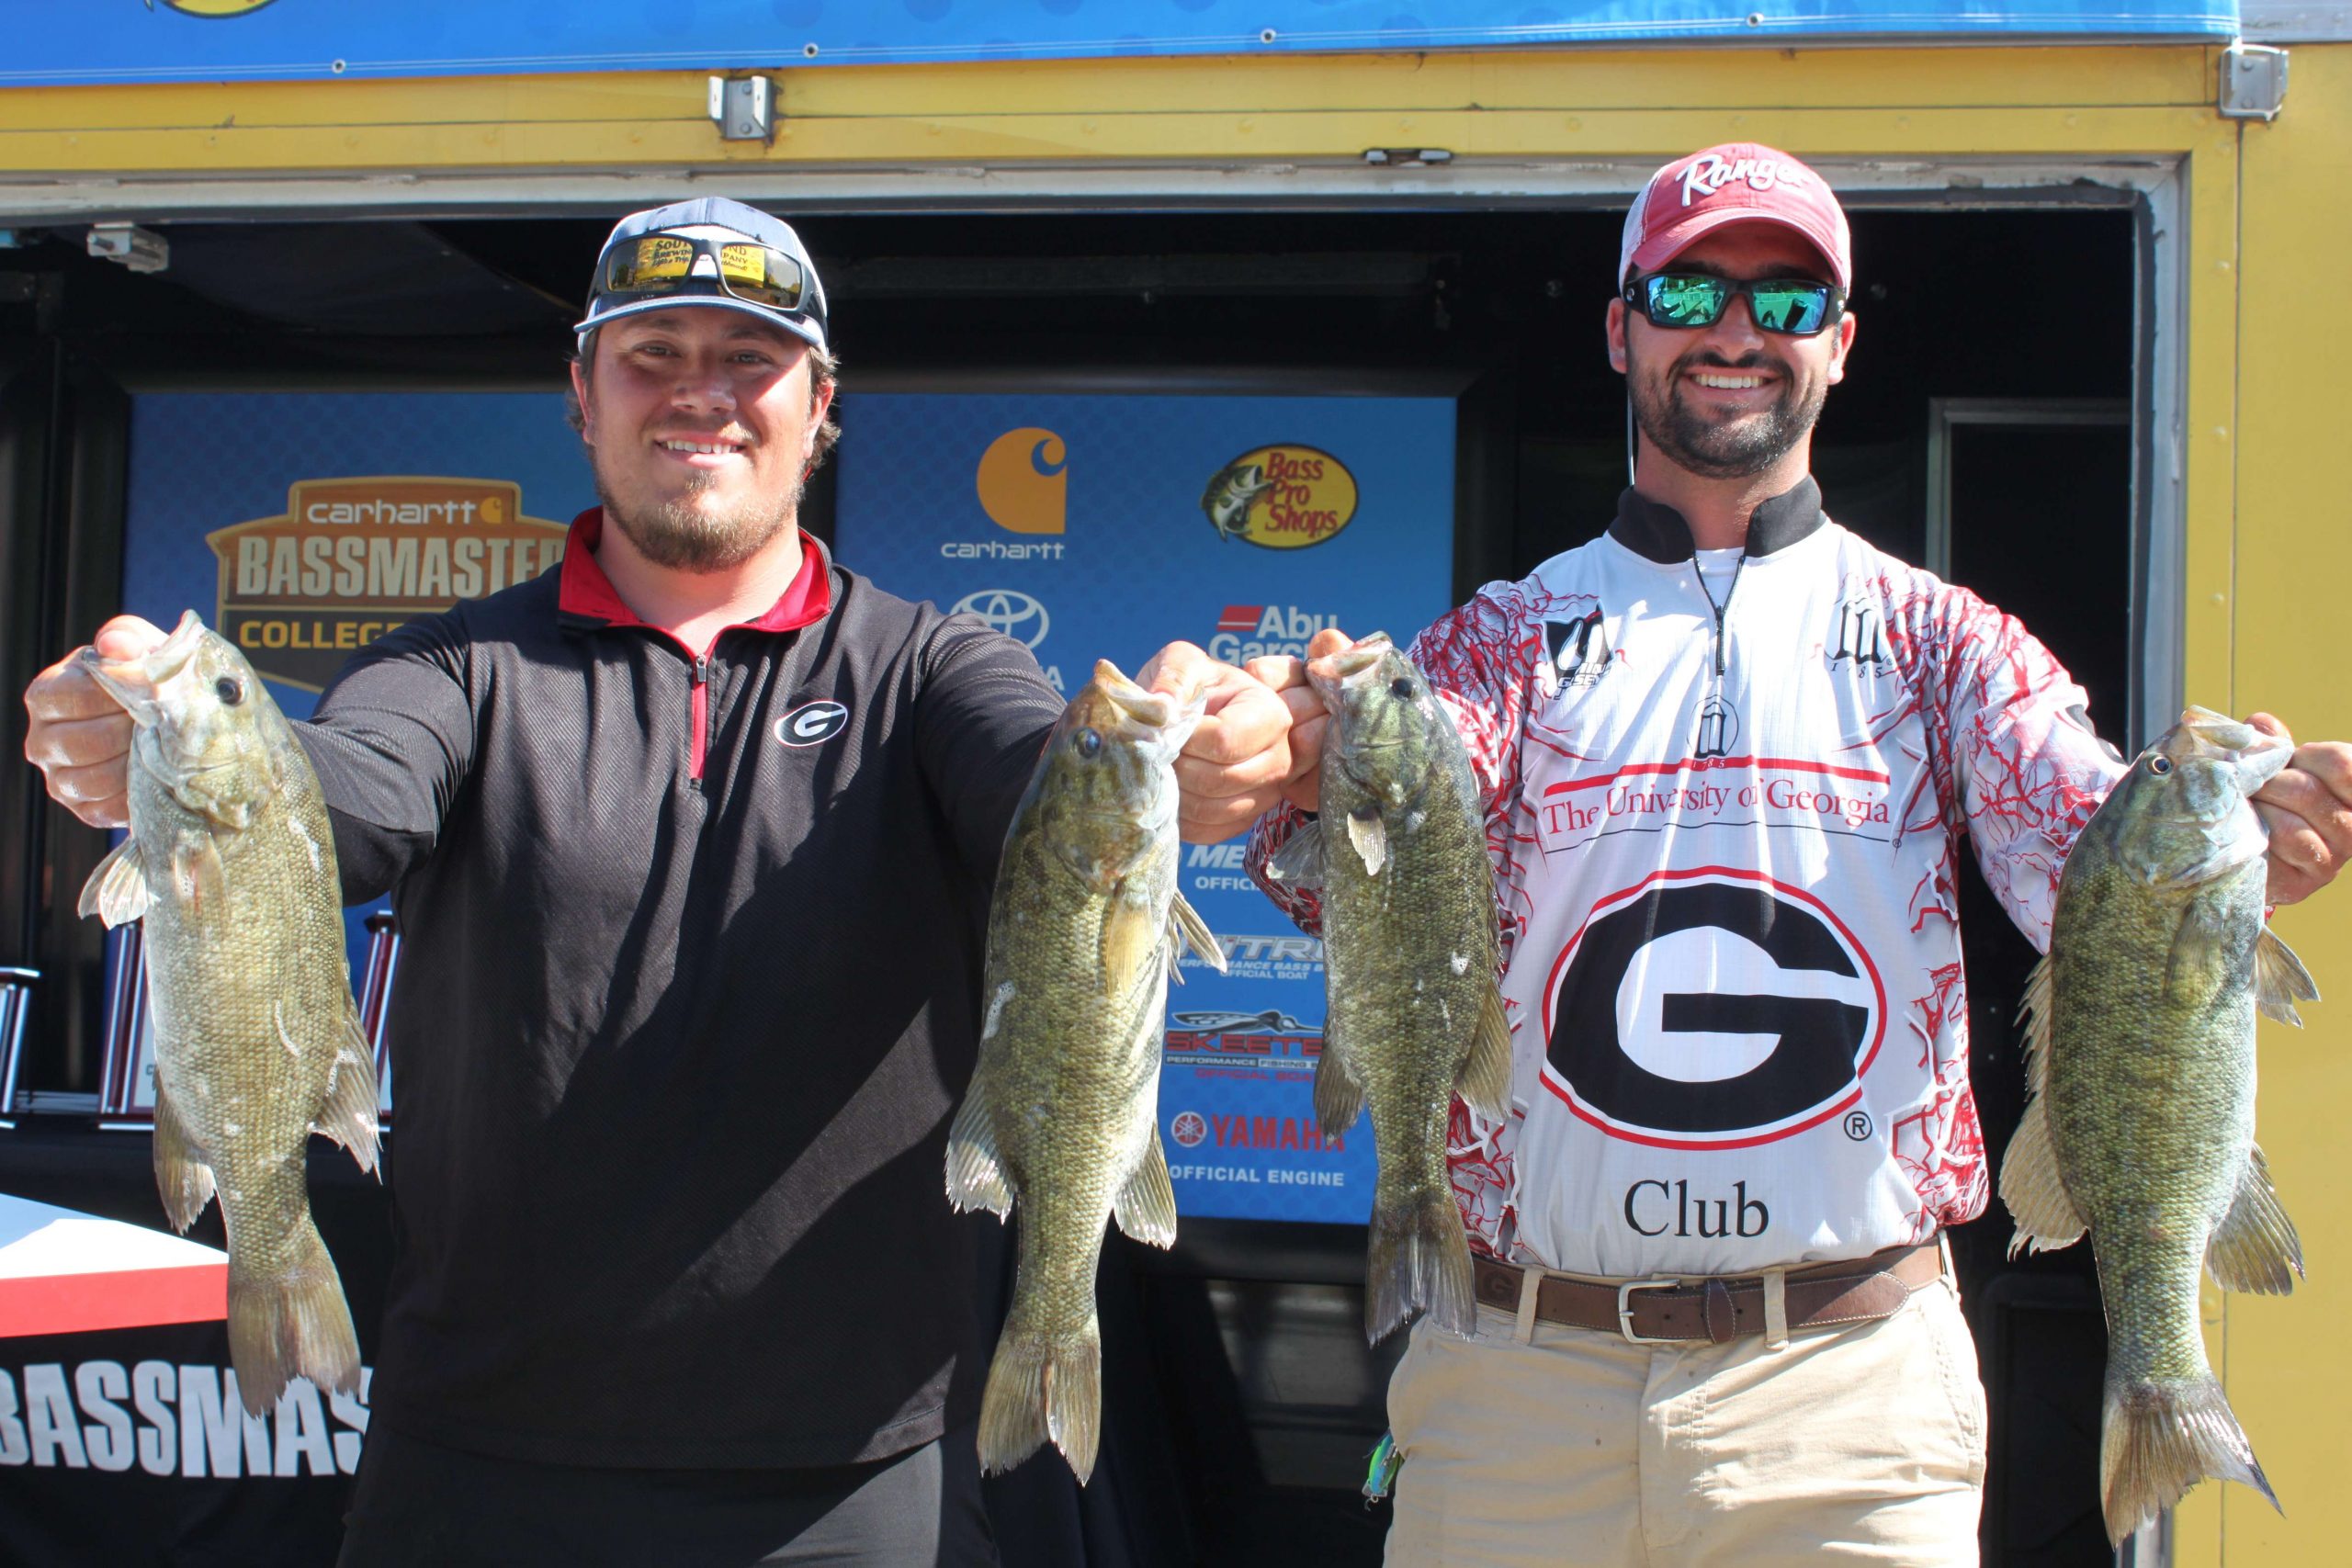 Nathan Ragsdale and Jerimiah Freelund of the University of Georgia placed 21st with 34-10.